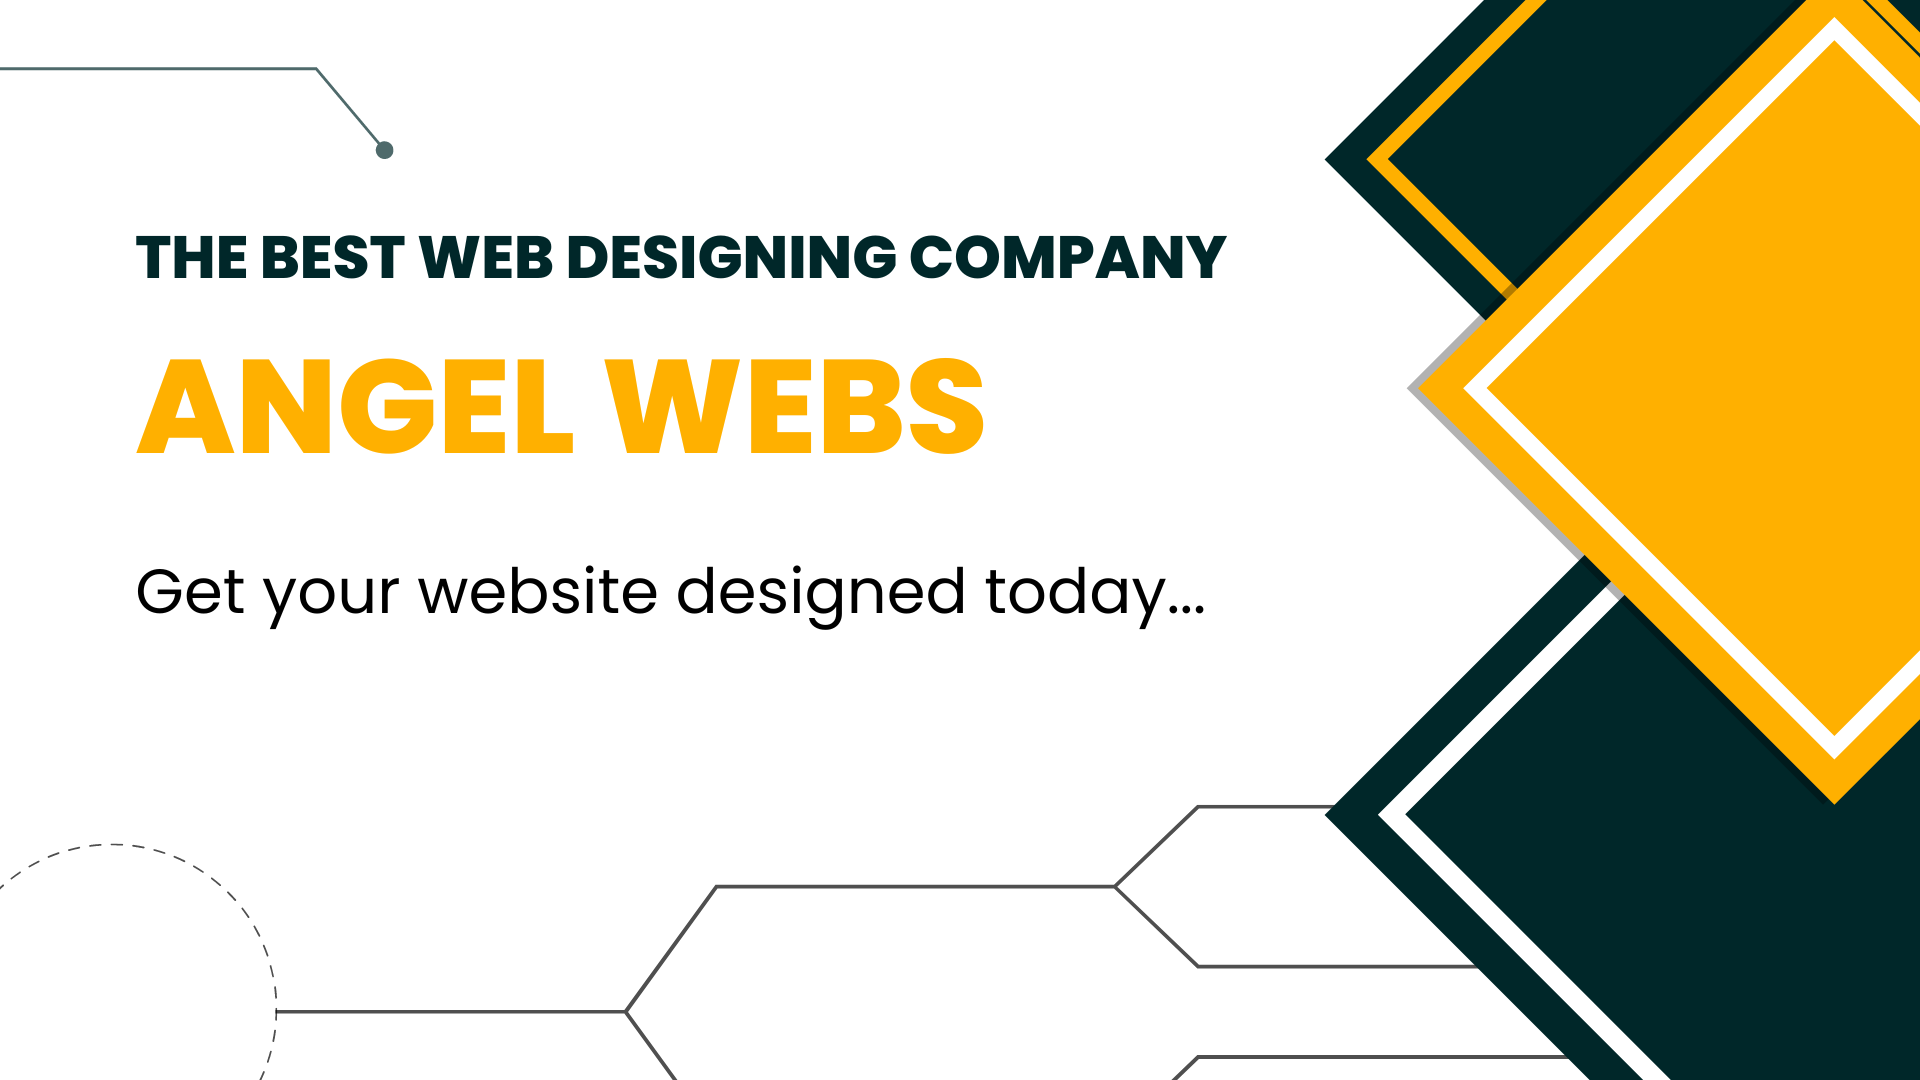 The Best Web Designing Company